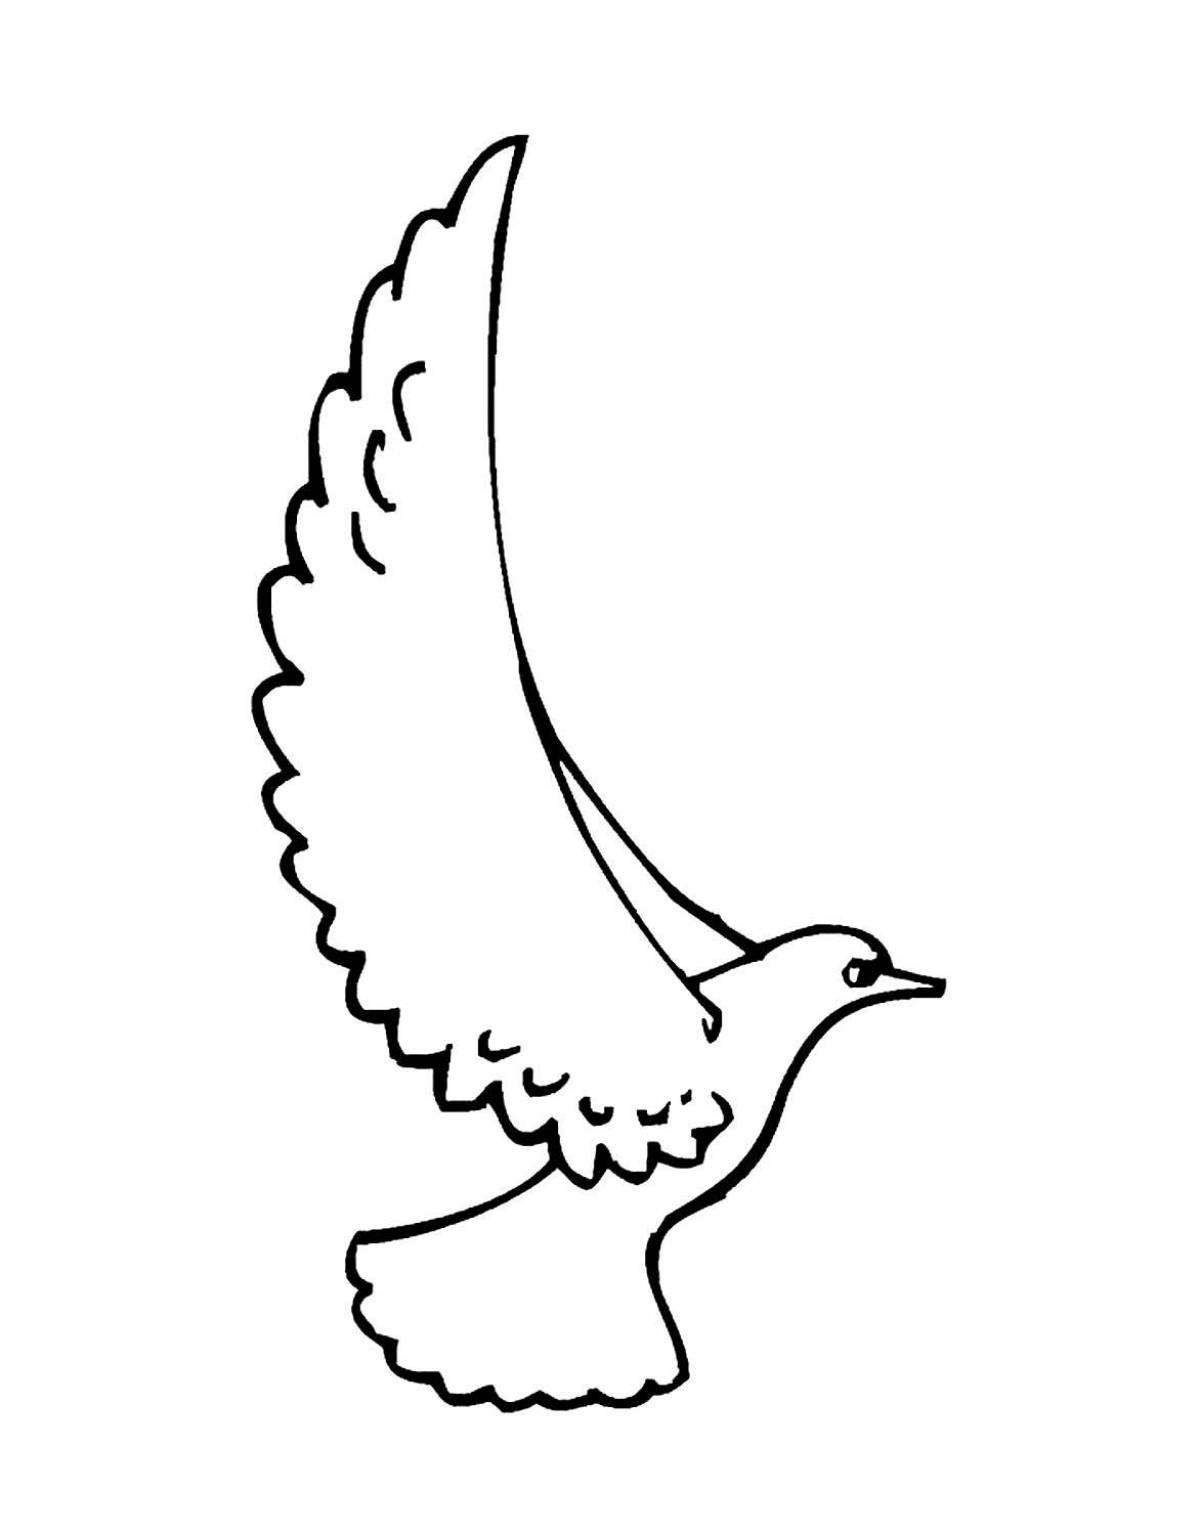 Flawless dove coloring book for kids